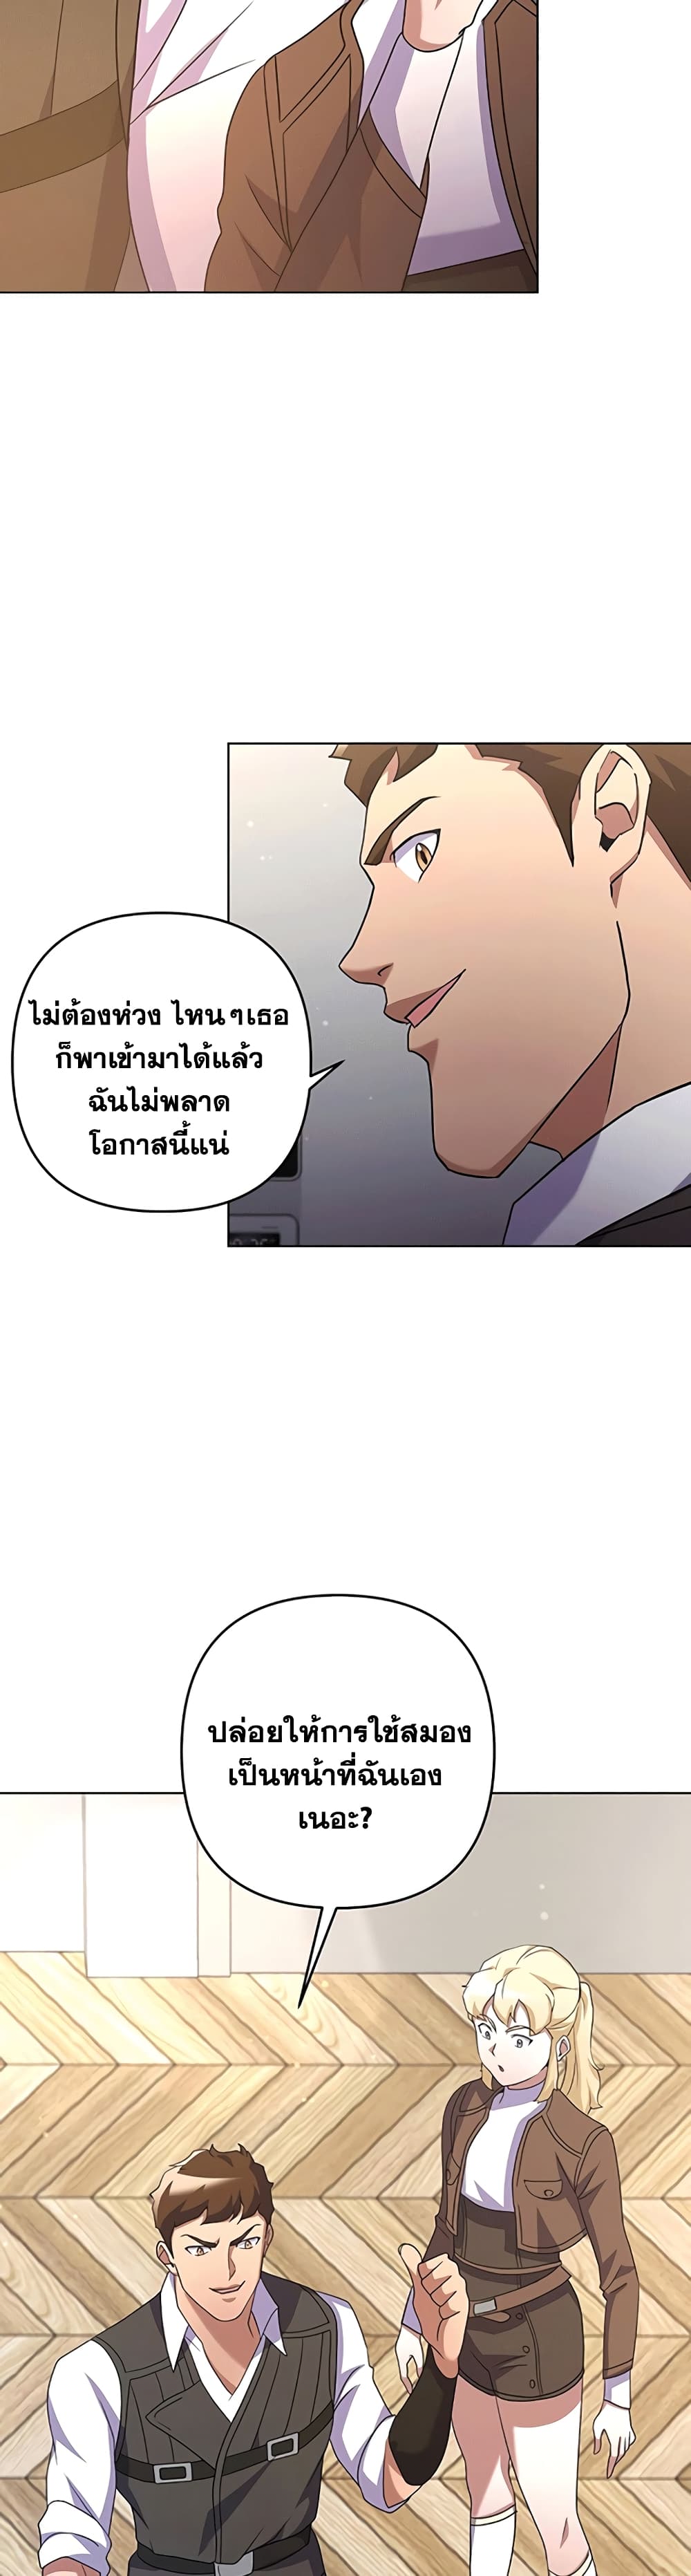 Surviving in an Action Manhwa21 (36)